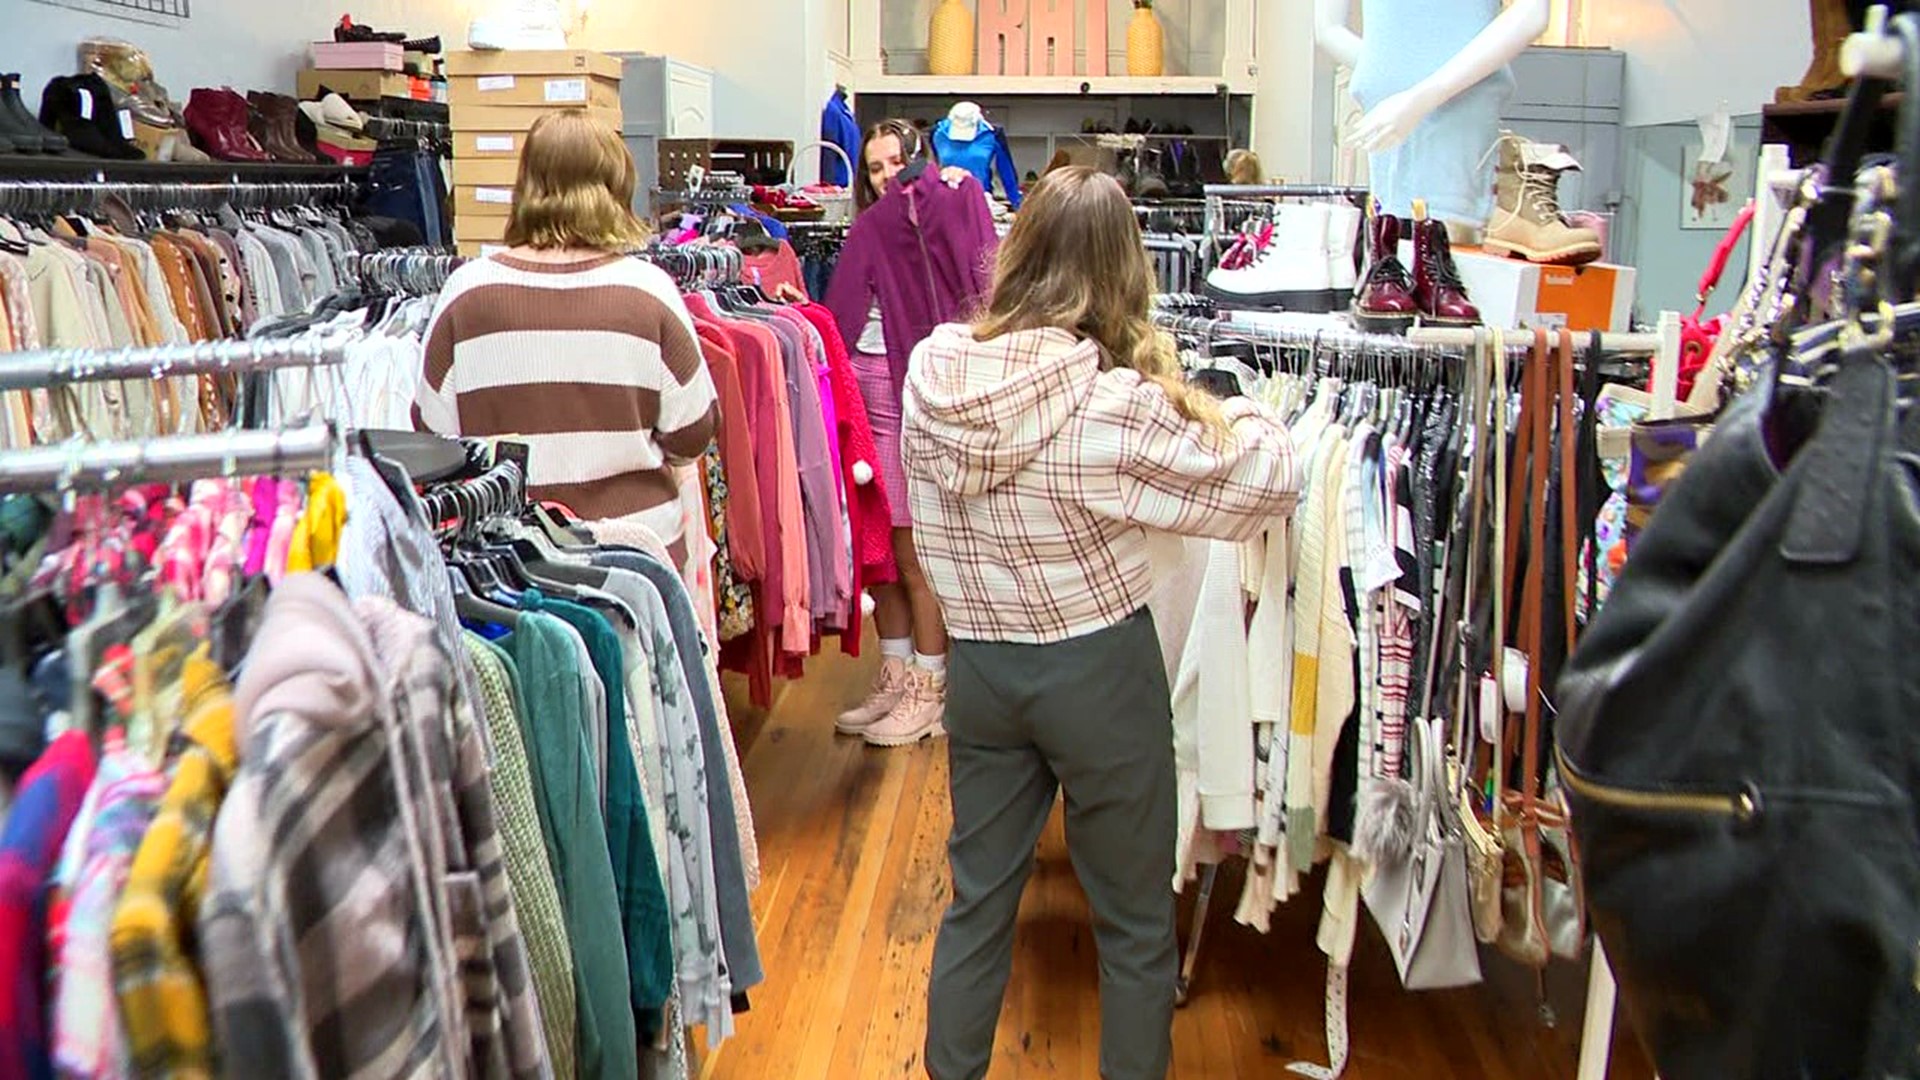 Luzerne County students thrifting for back-to-school clothes | wnep.com